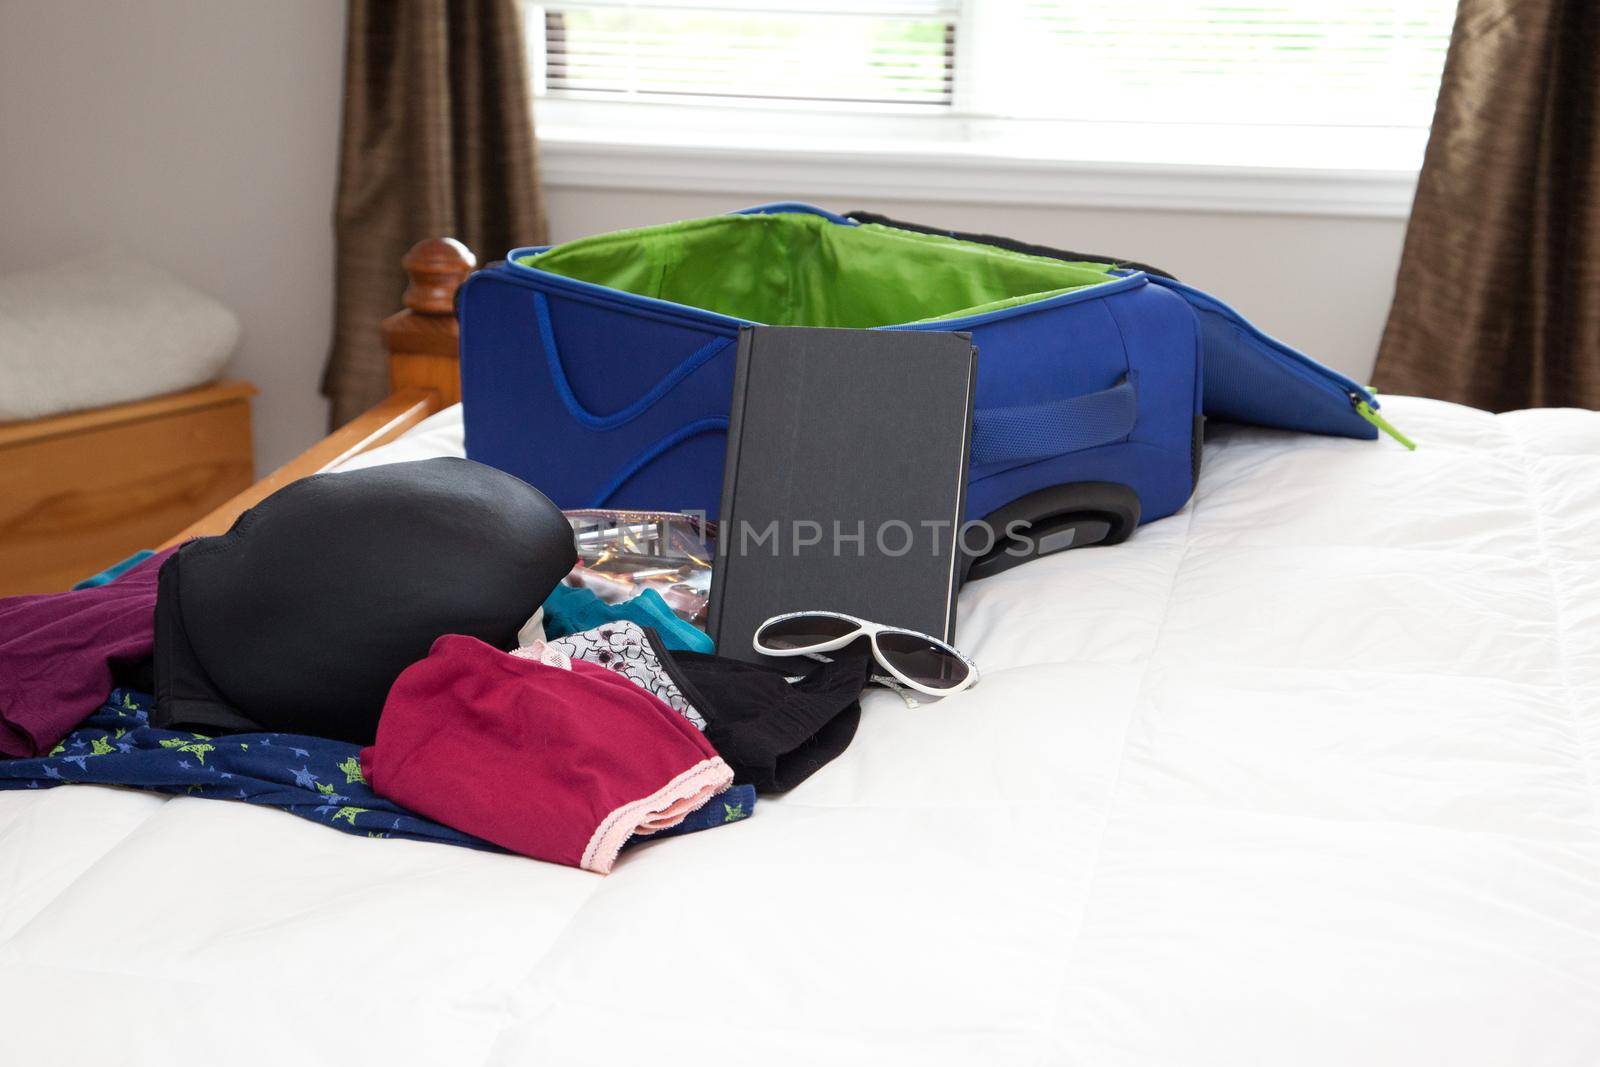 A blue suitcase is open on a bed, ready to be packed with undergarments and books for a trip 